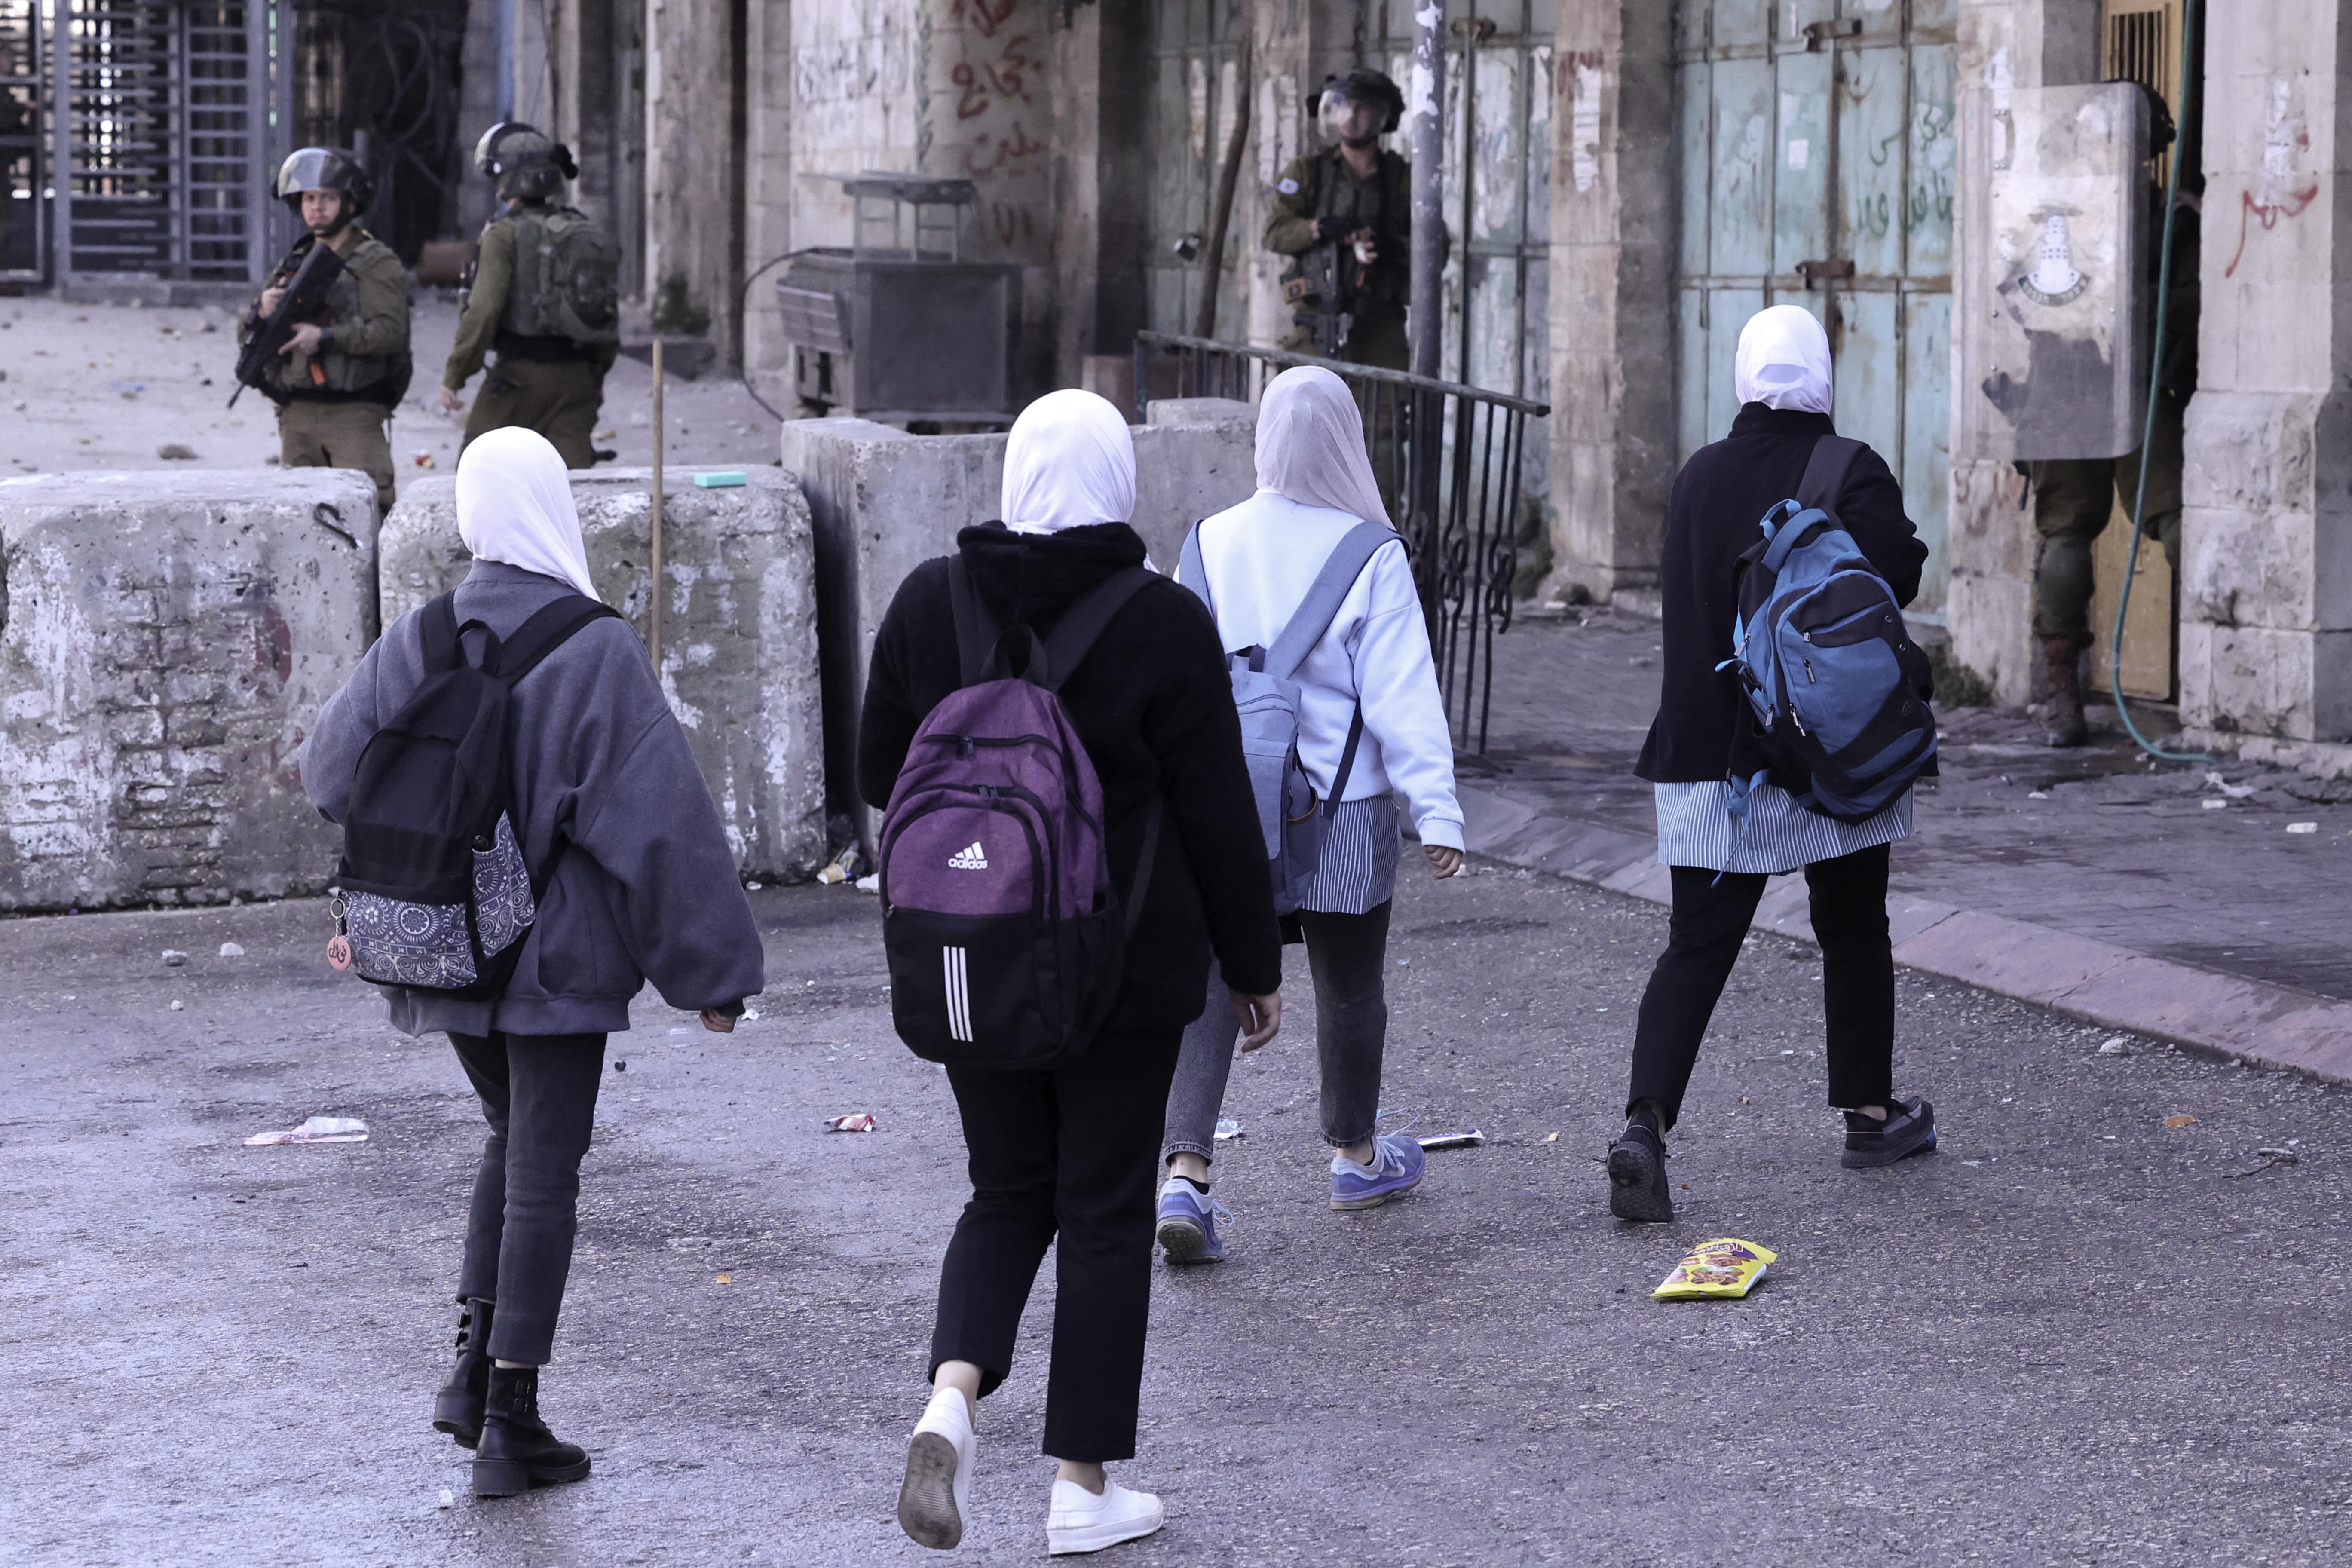 Palestinian students walk as Israeli forces crackdown on protests in Hebron on 2 March 1, 2022 (Afp)